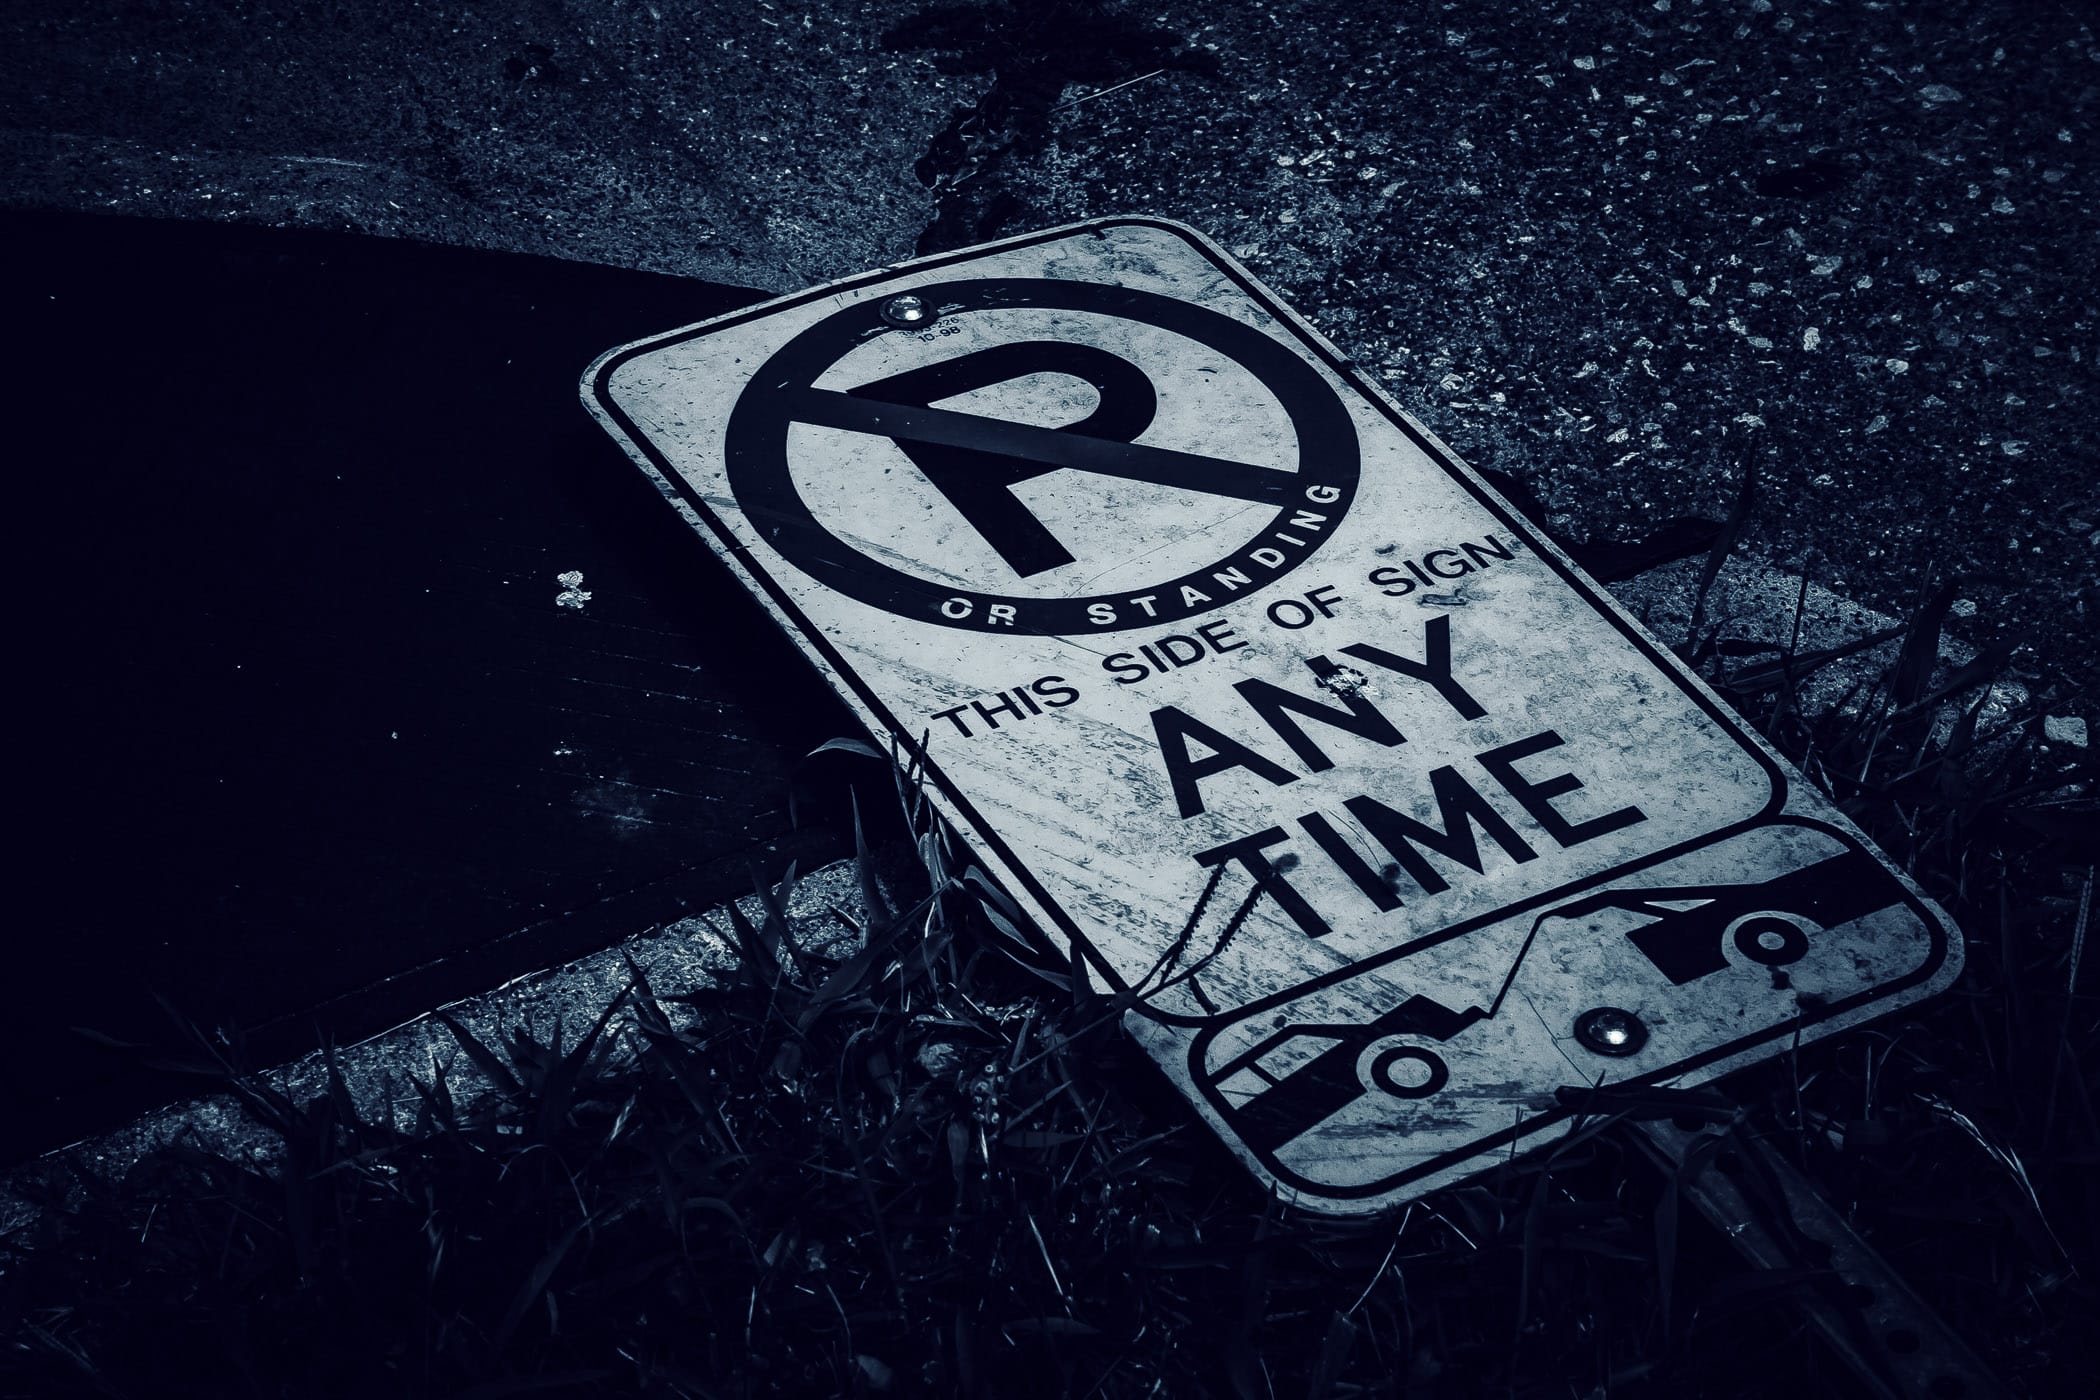 A fallen no parking sign spotted along a road in Uptown Dallas, Texas.